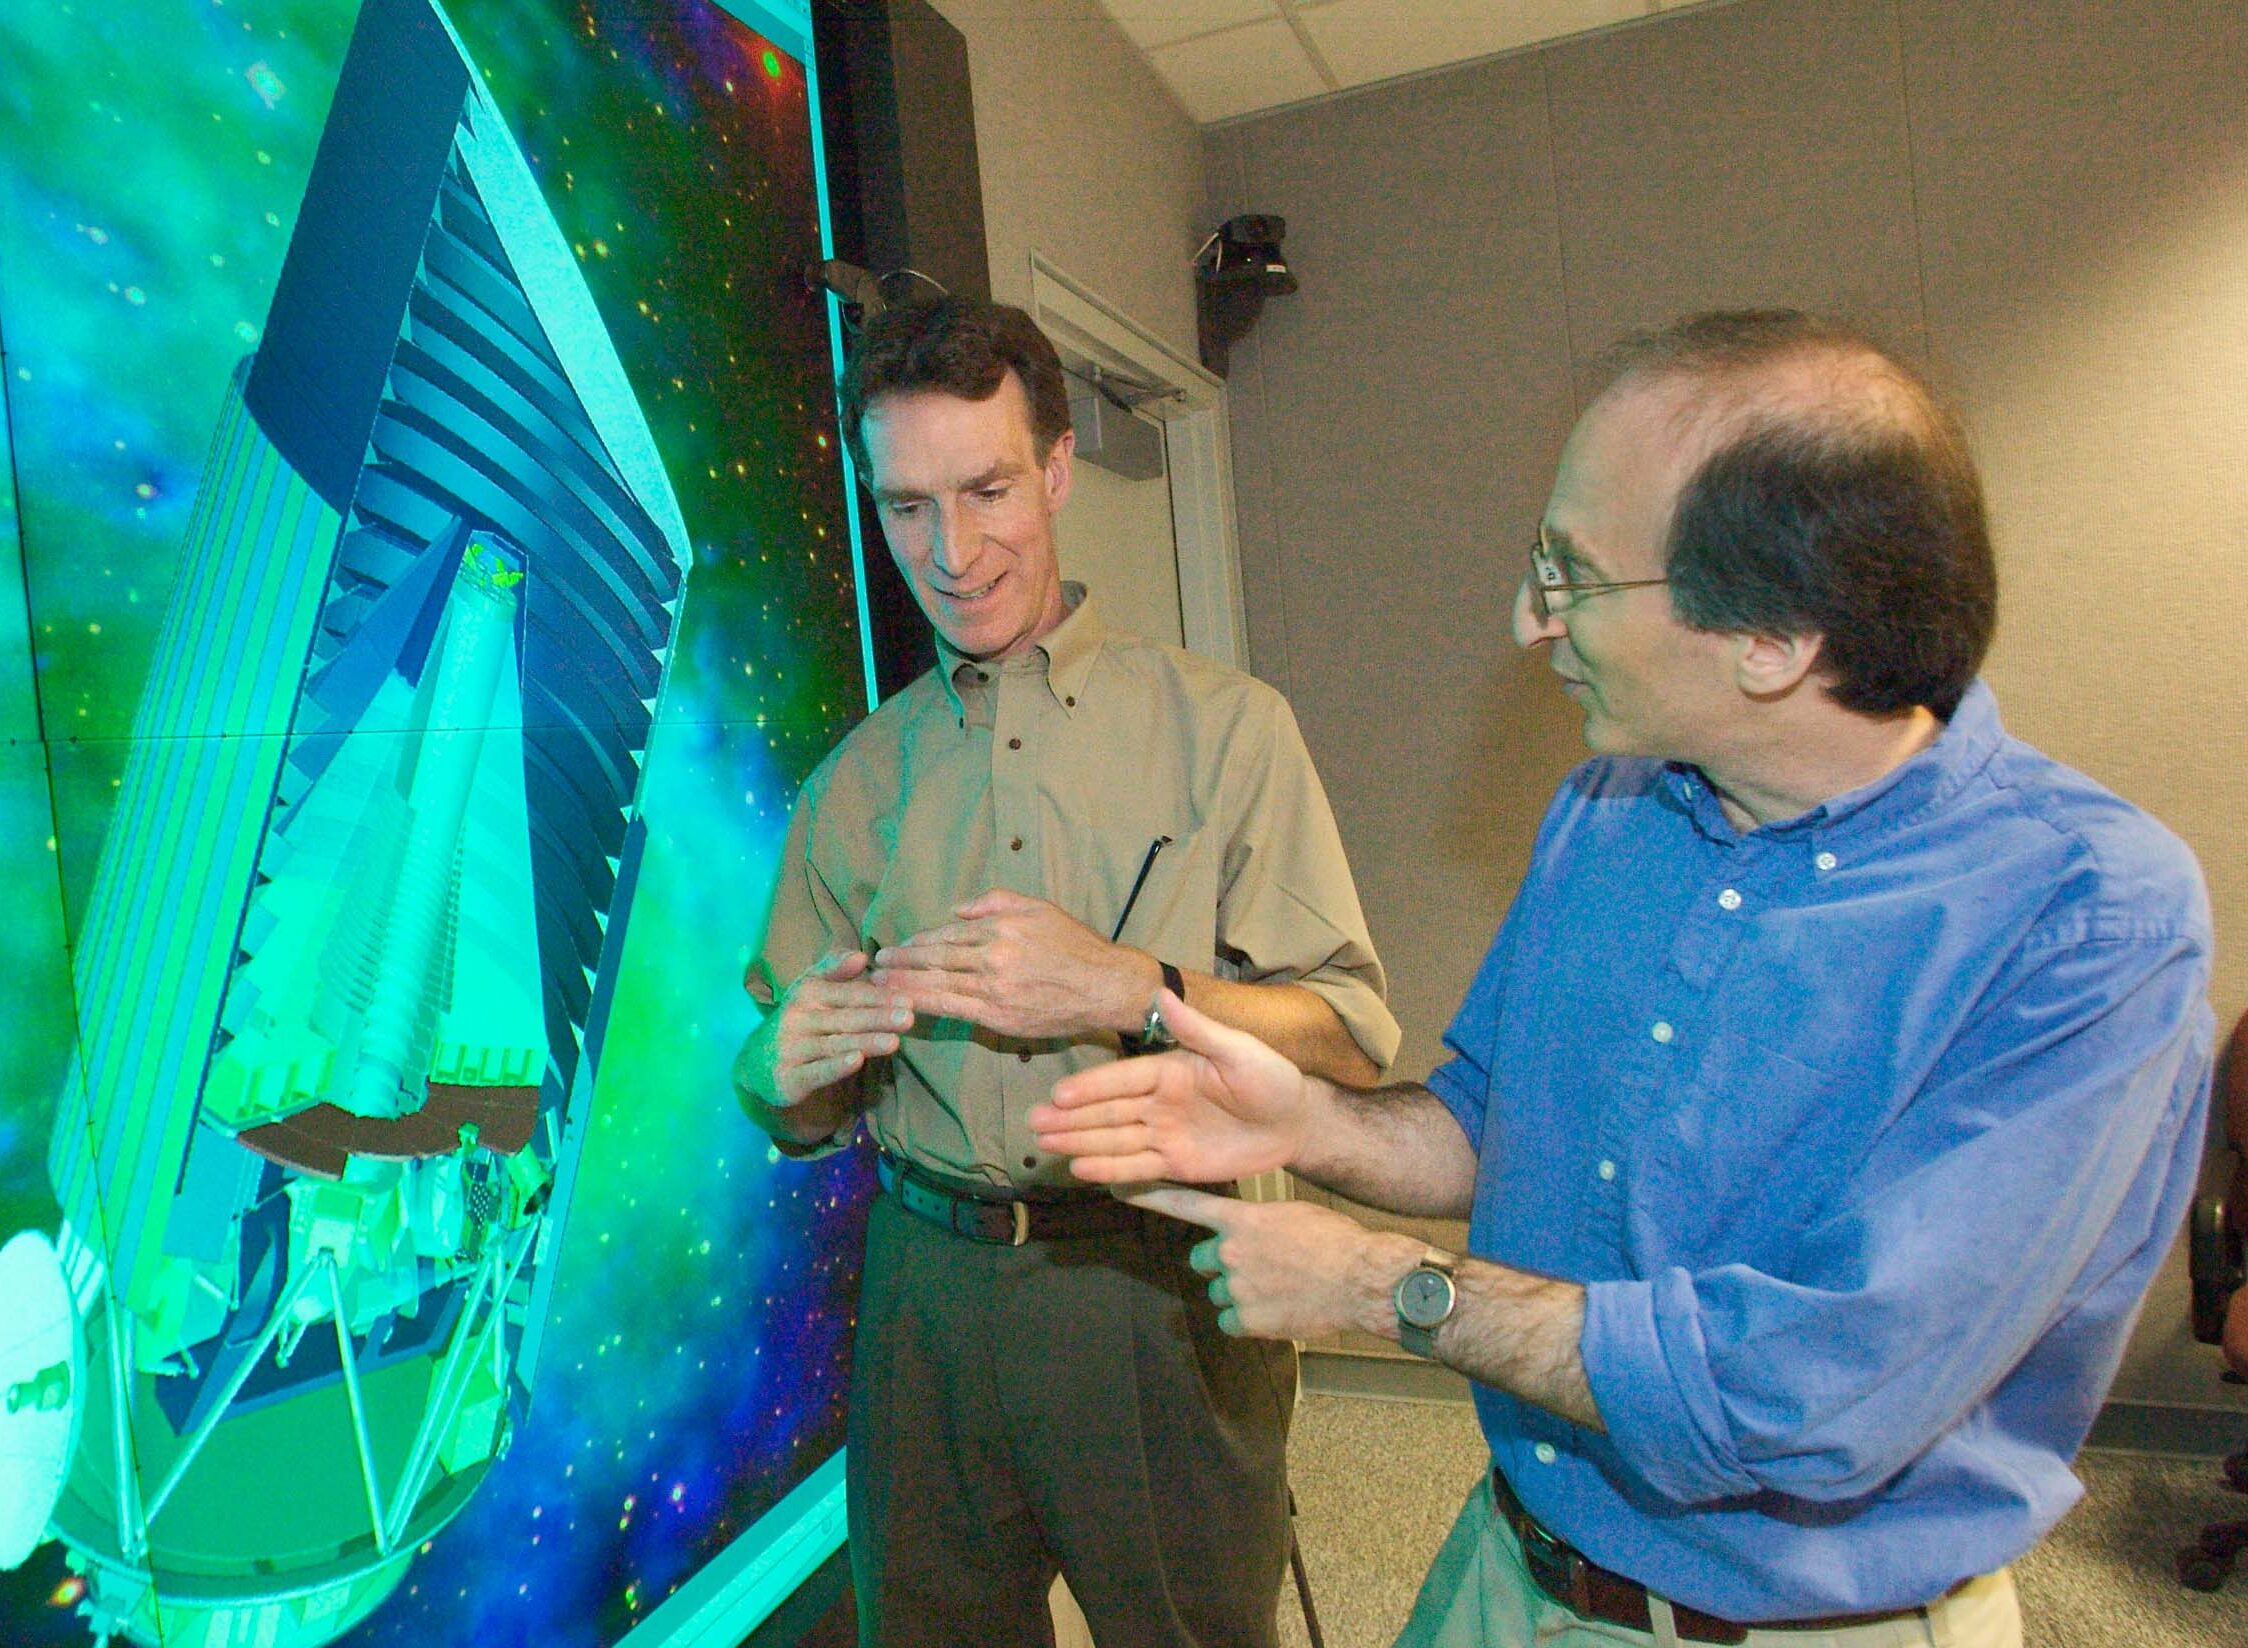 Saul Perlmutter with Bill Nye in front of a multiscreen.